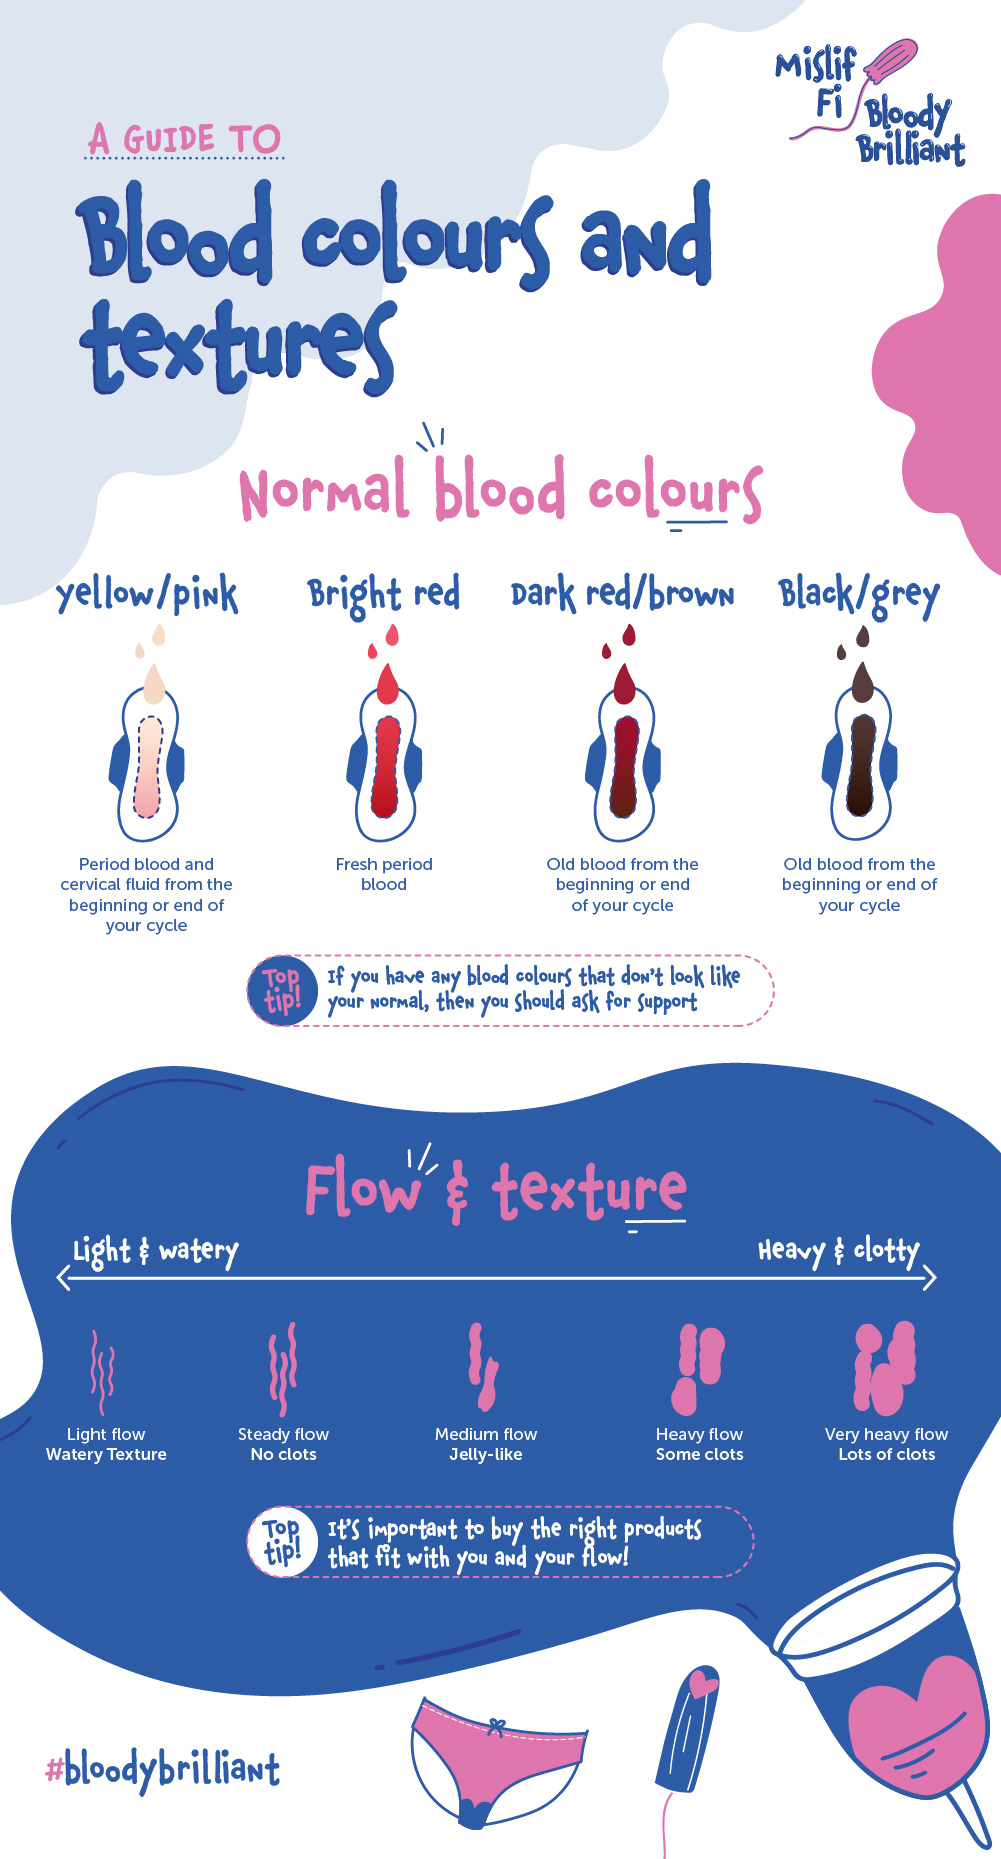 A bloody colourful guide to period blood and textures :: Bloody